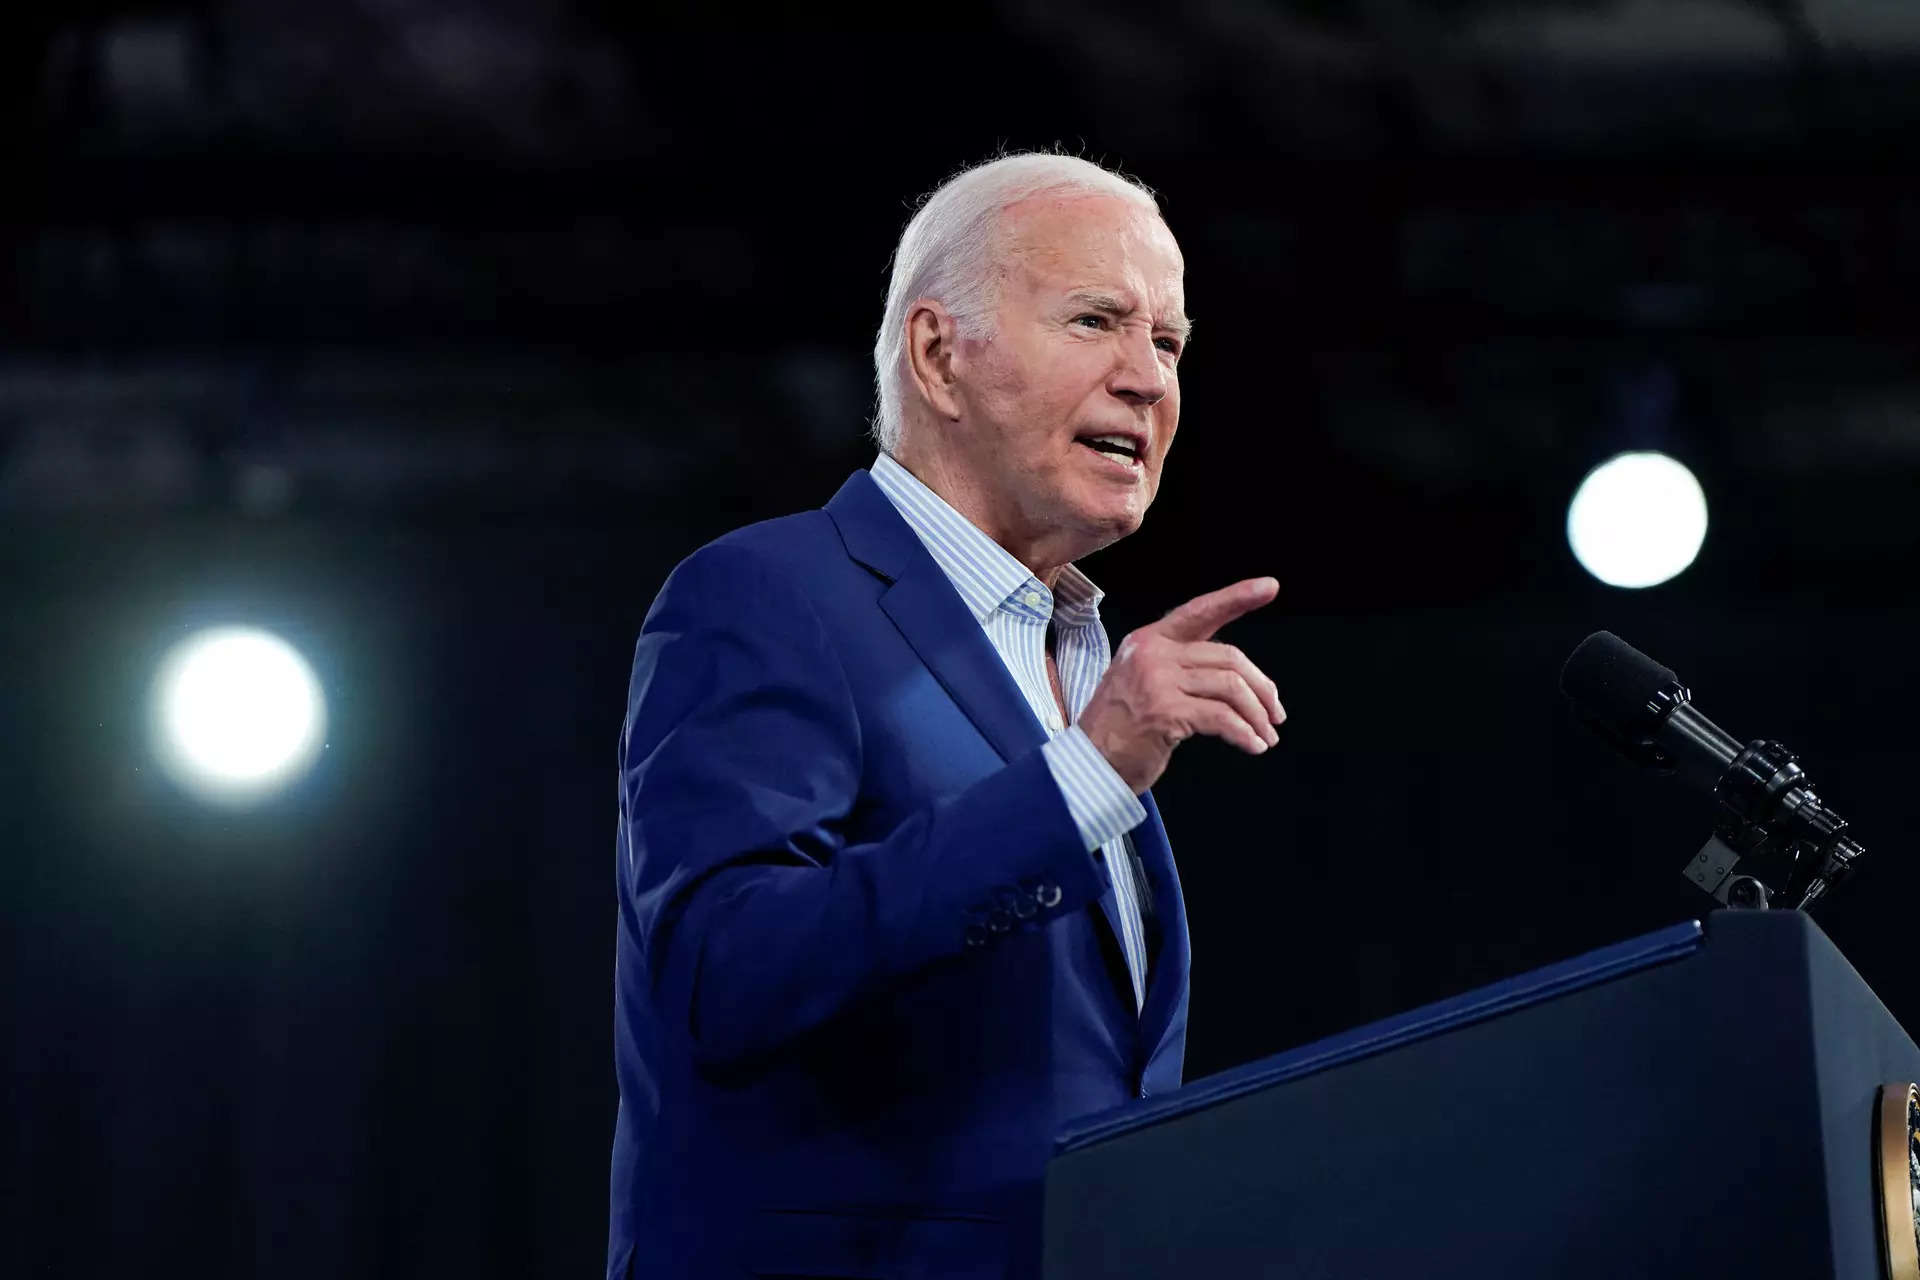 How did President Joe Biden prepare for the first Presidential Debate? Report highlights some shortcomings 